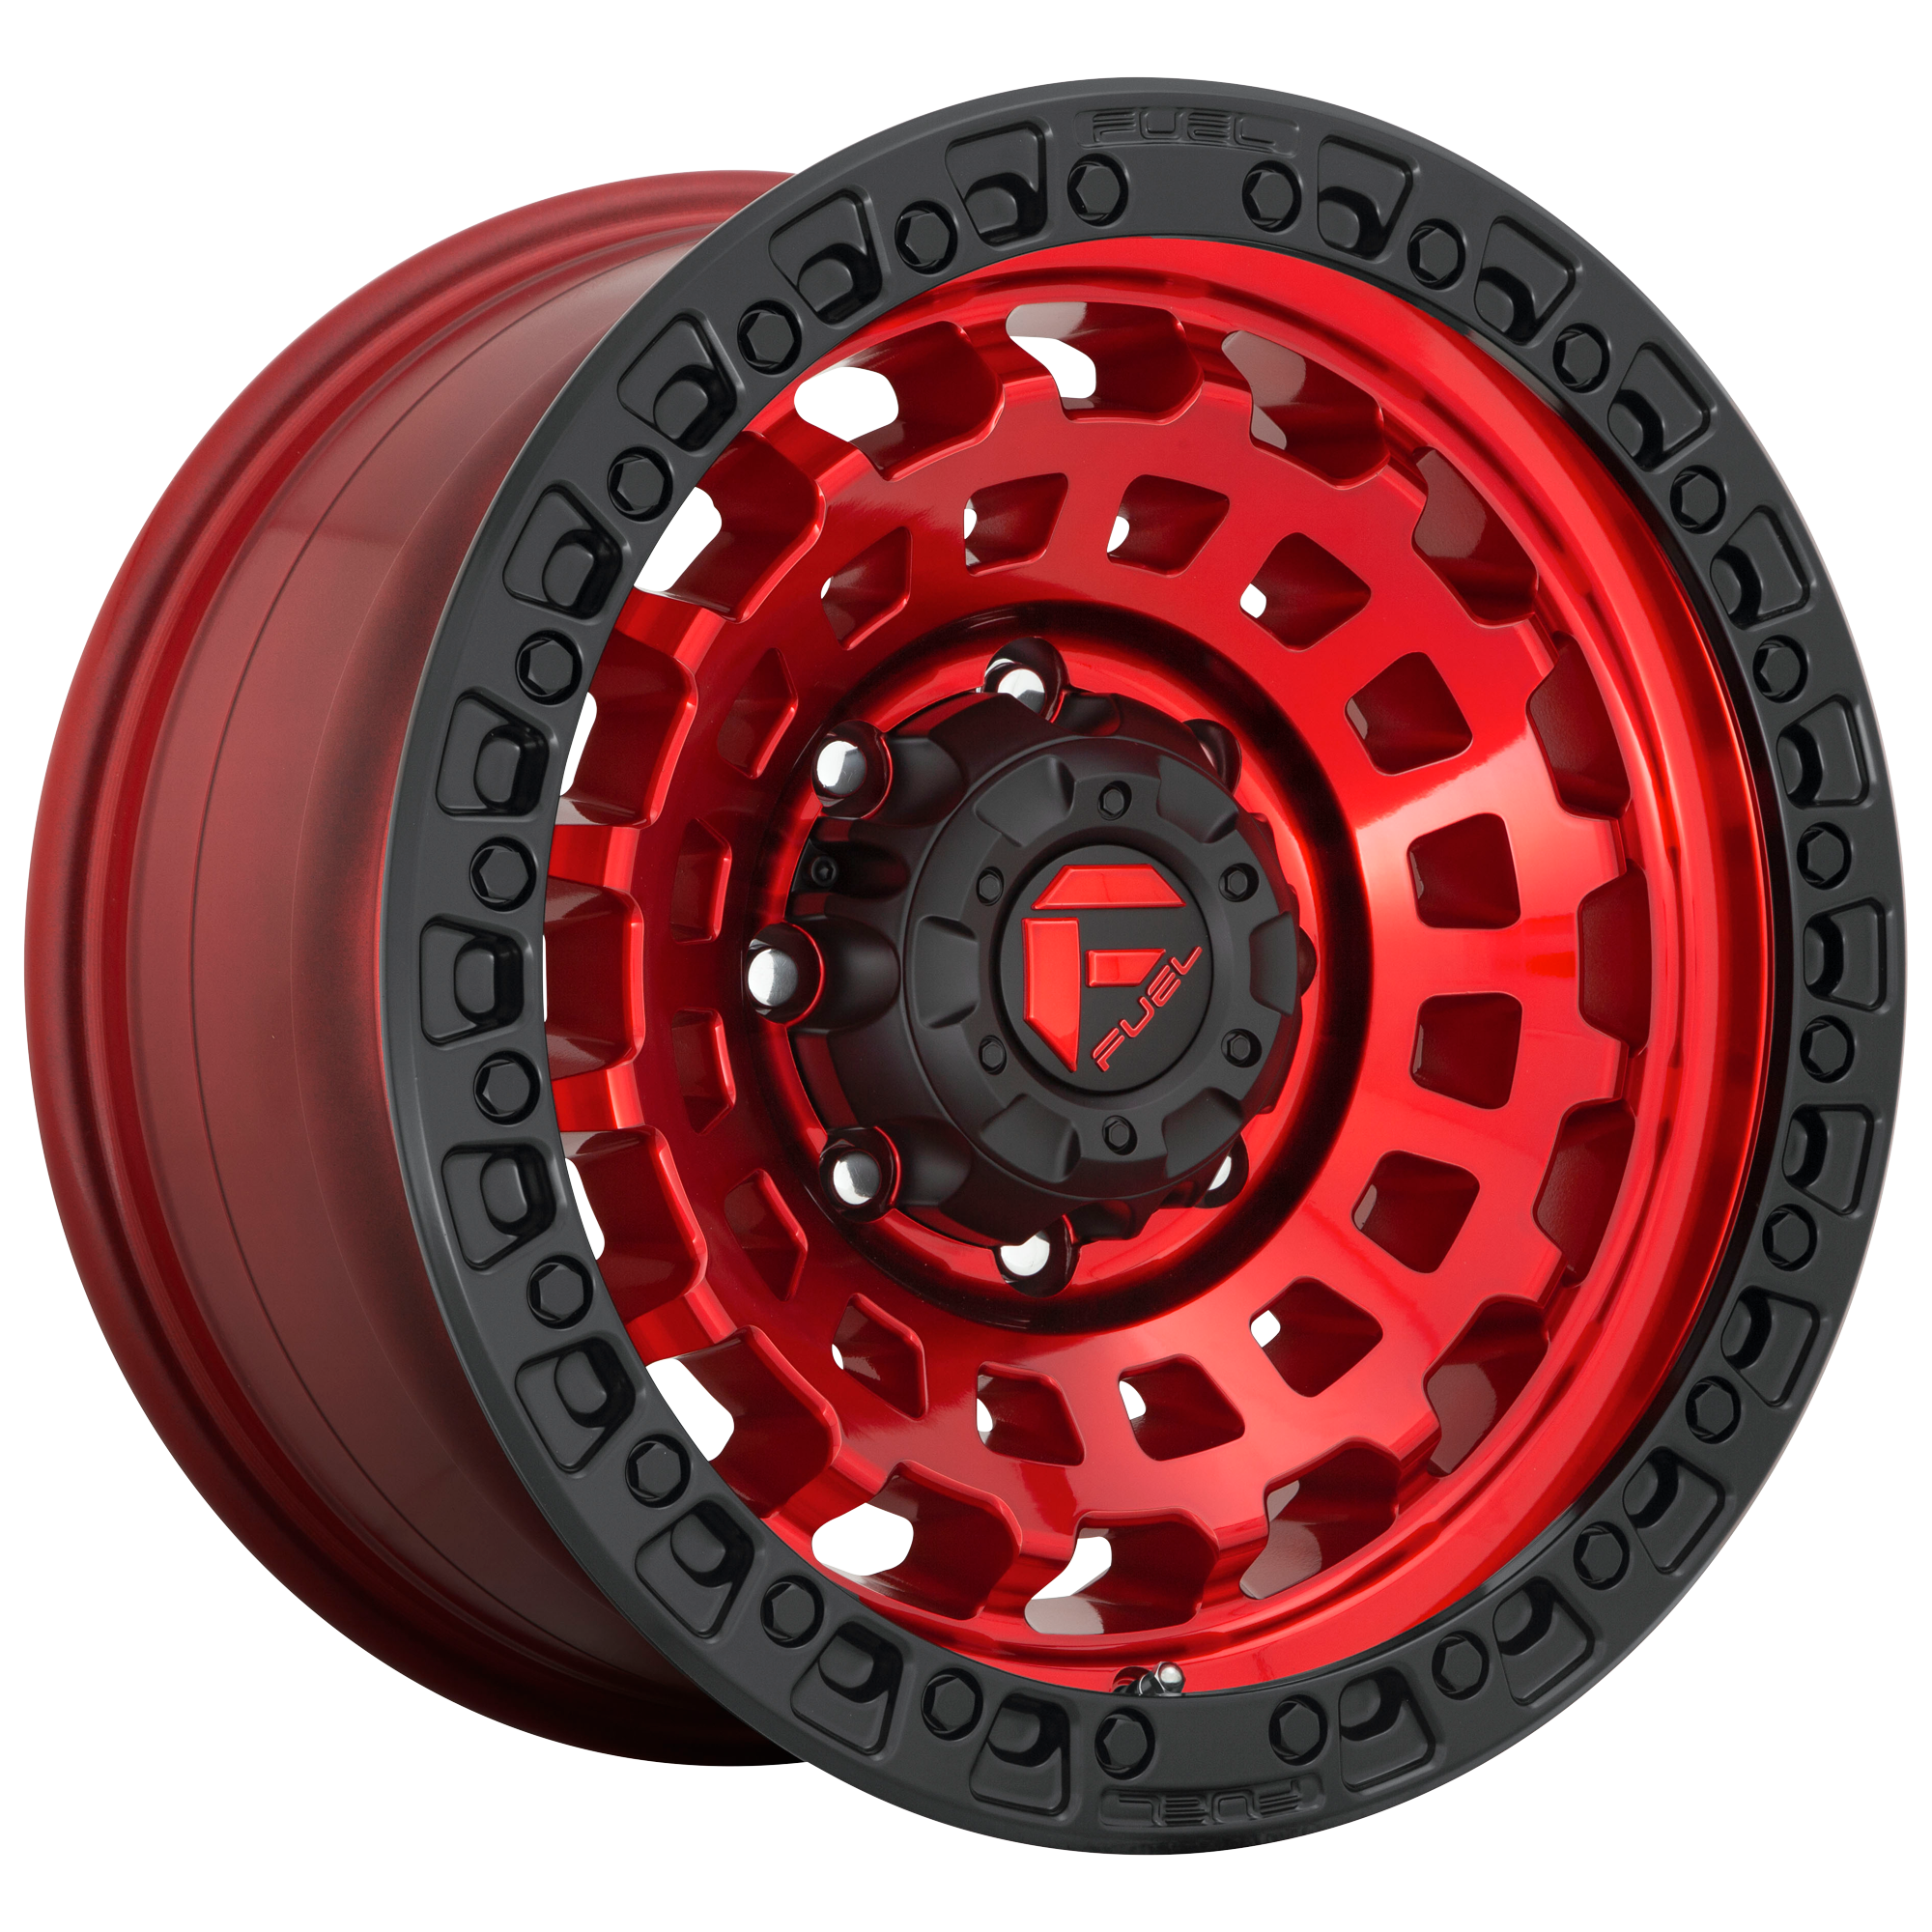 ZEPHYR 18x9 8x170.00 CANDY RED BLACK BEAD RING (1 mm) - Tires and Engine Performance